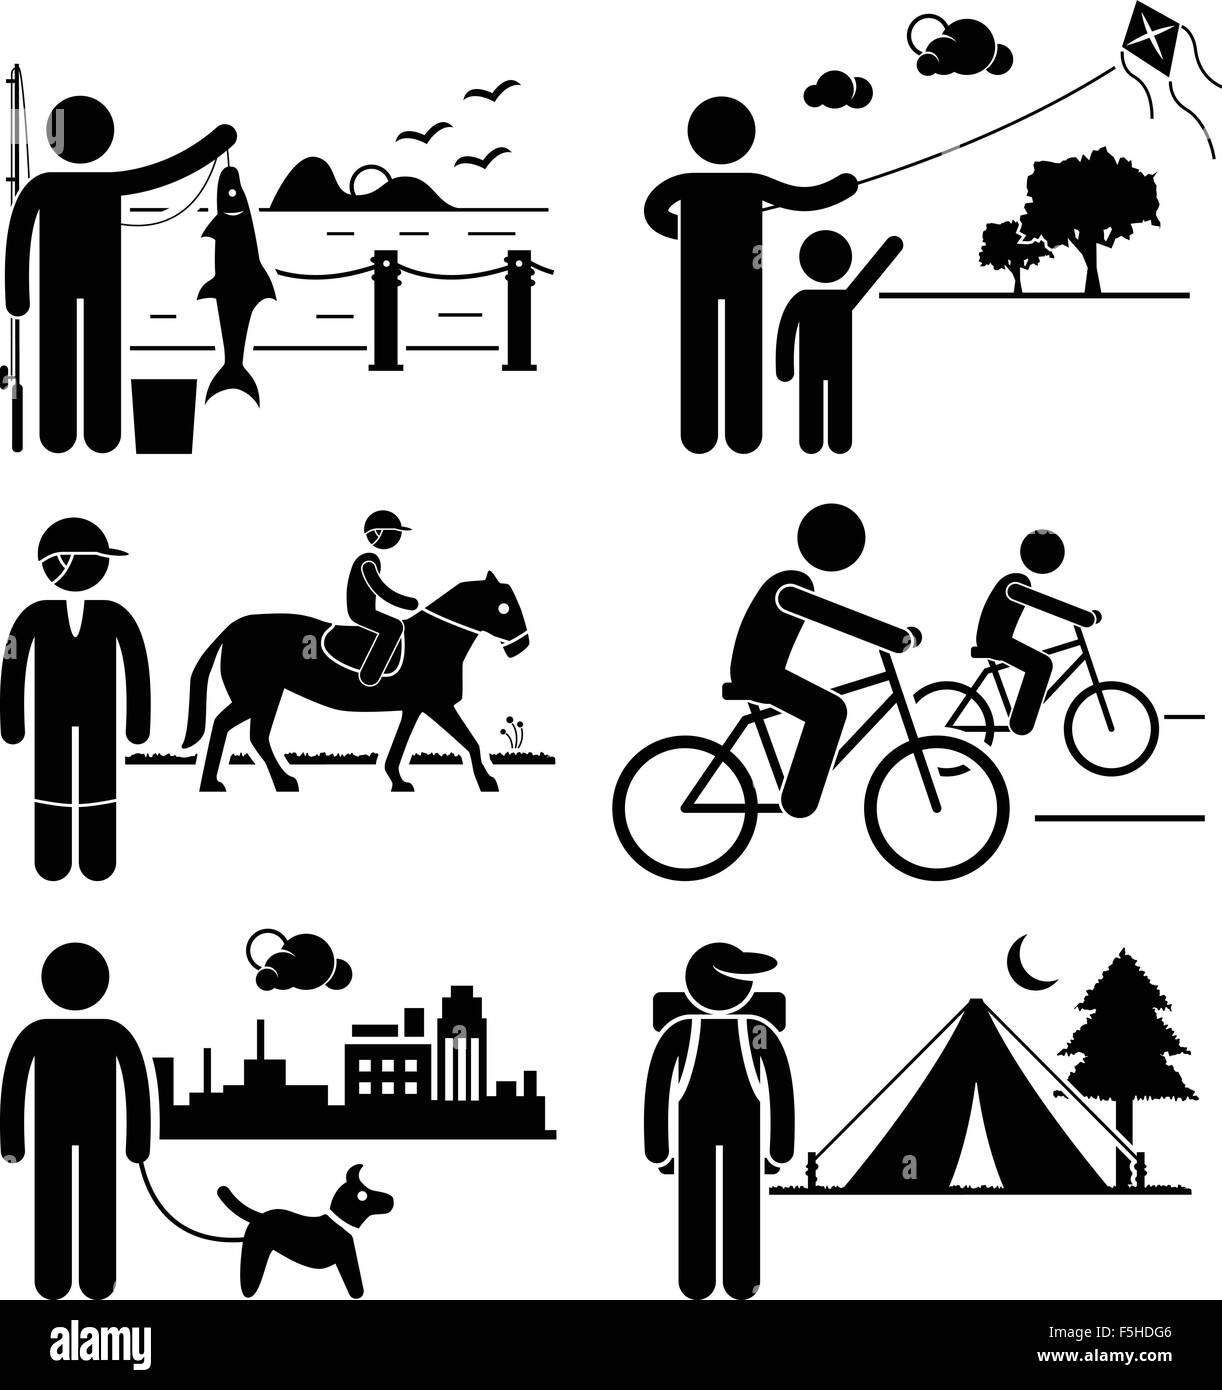 Recreational Outdoor Leisure Activities - Fishing, Kite, Horse Riding, Cycling, Dog Walking, Camping - Stick Figure Pictogram Stock Vector